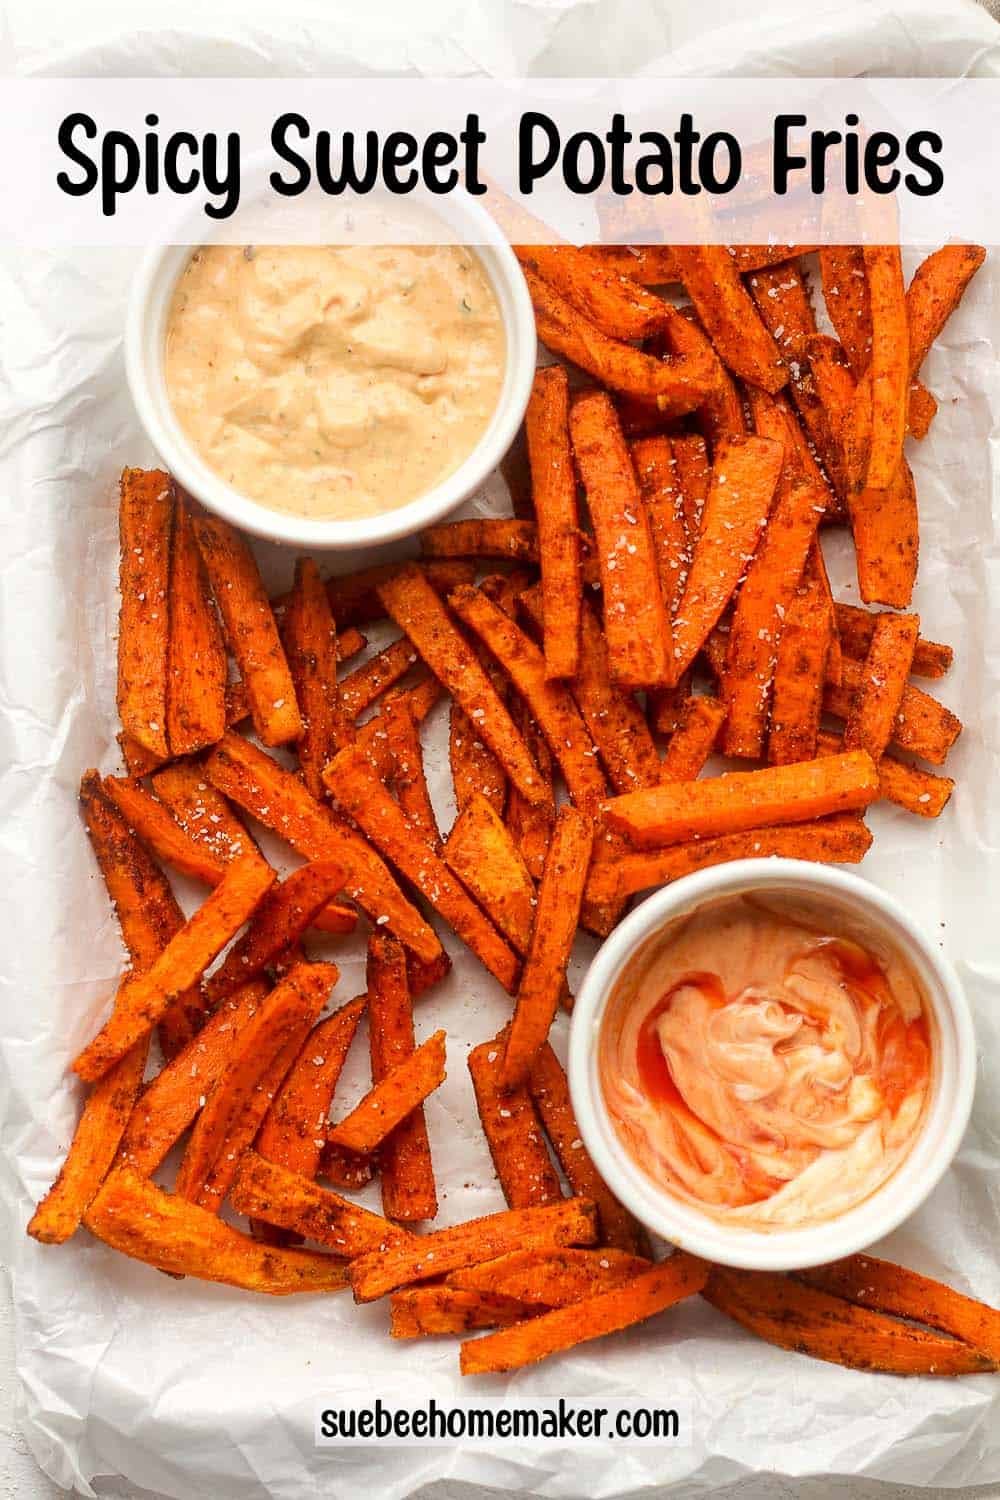 Overhead of a tray of spicy sweet potato fries with bowls of dipping sauce.